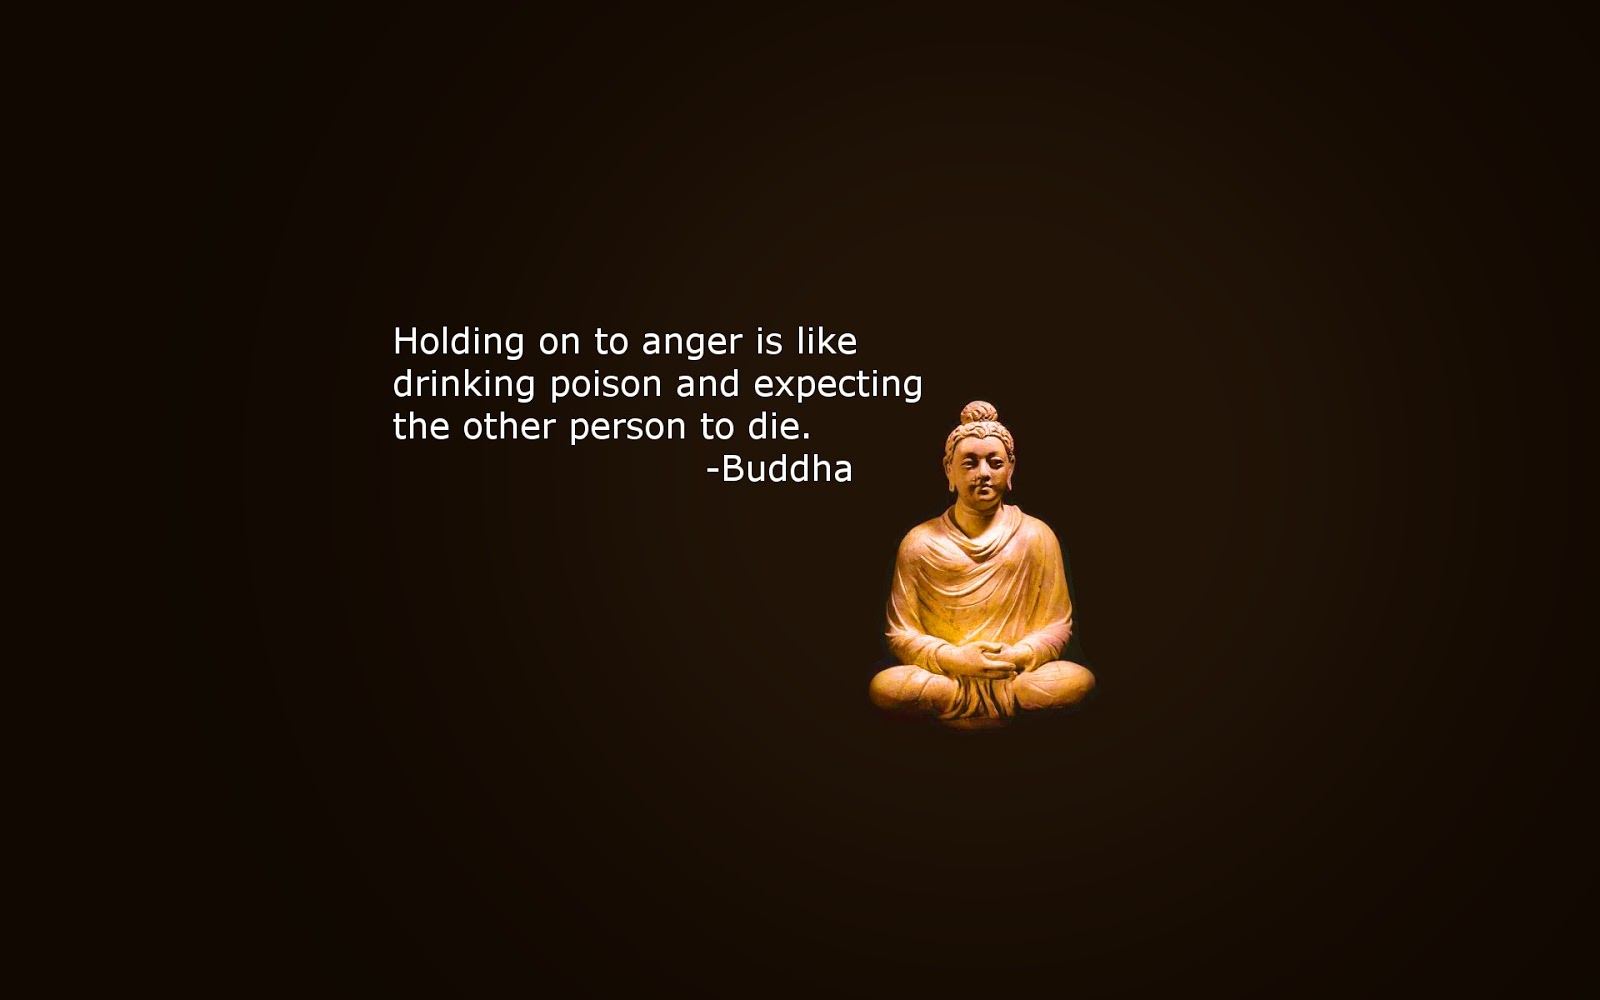 buddha quotes on anger wallpaper picture image jpg buddha quotes